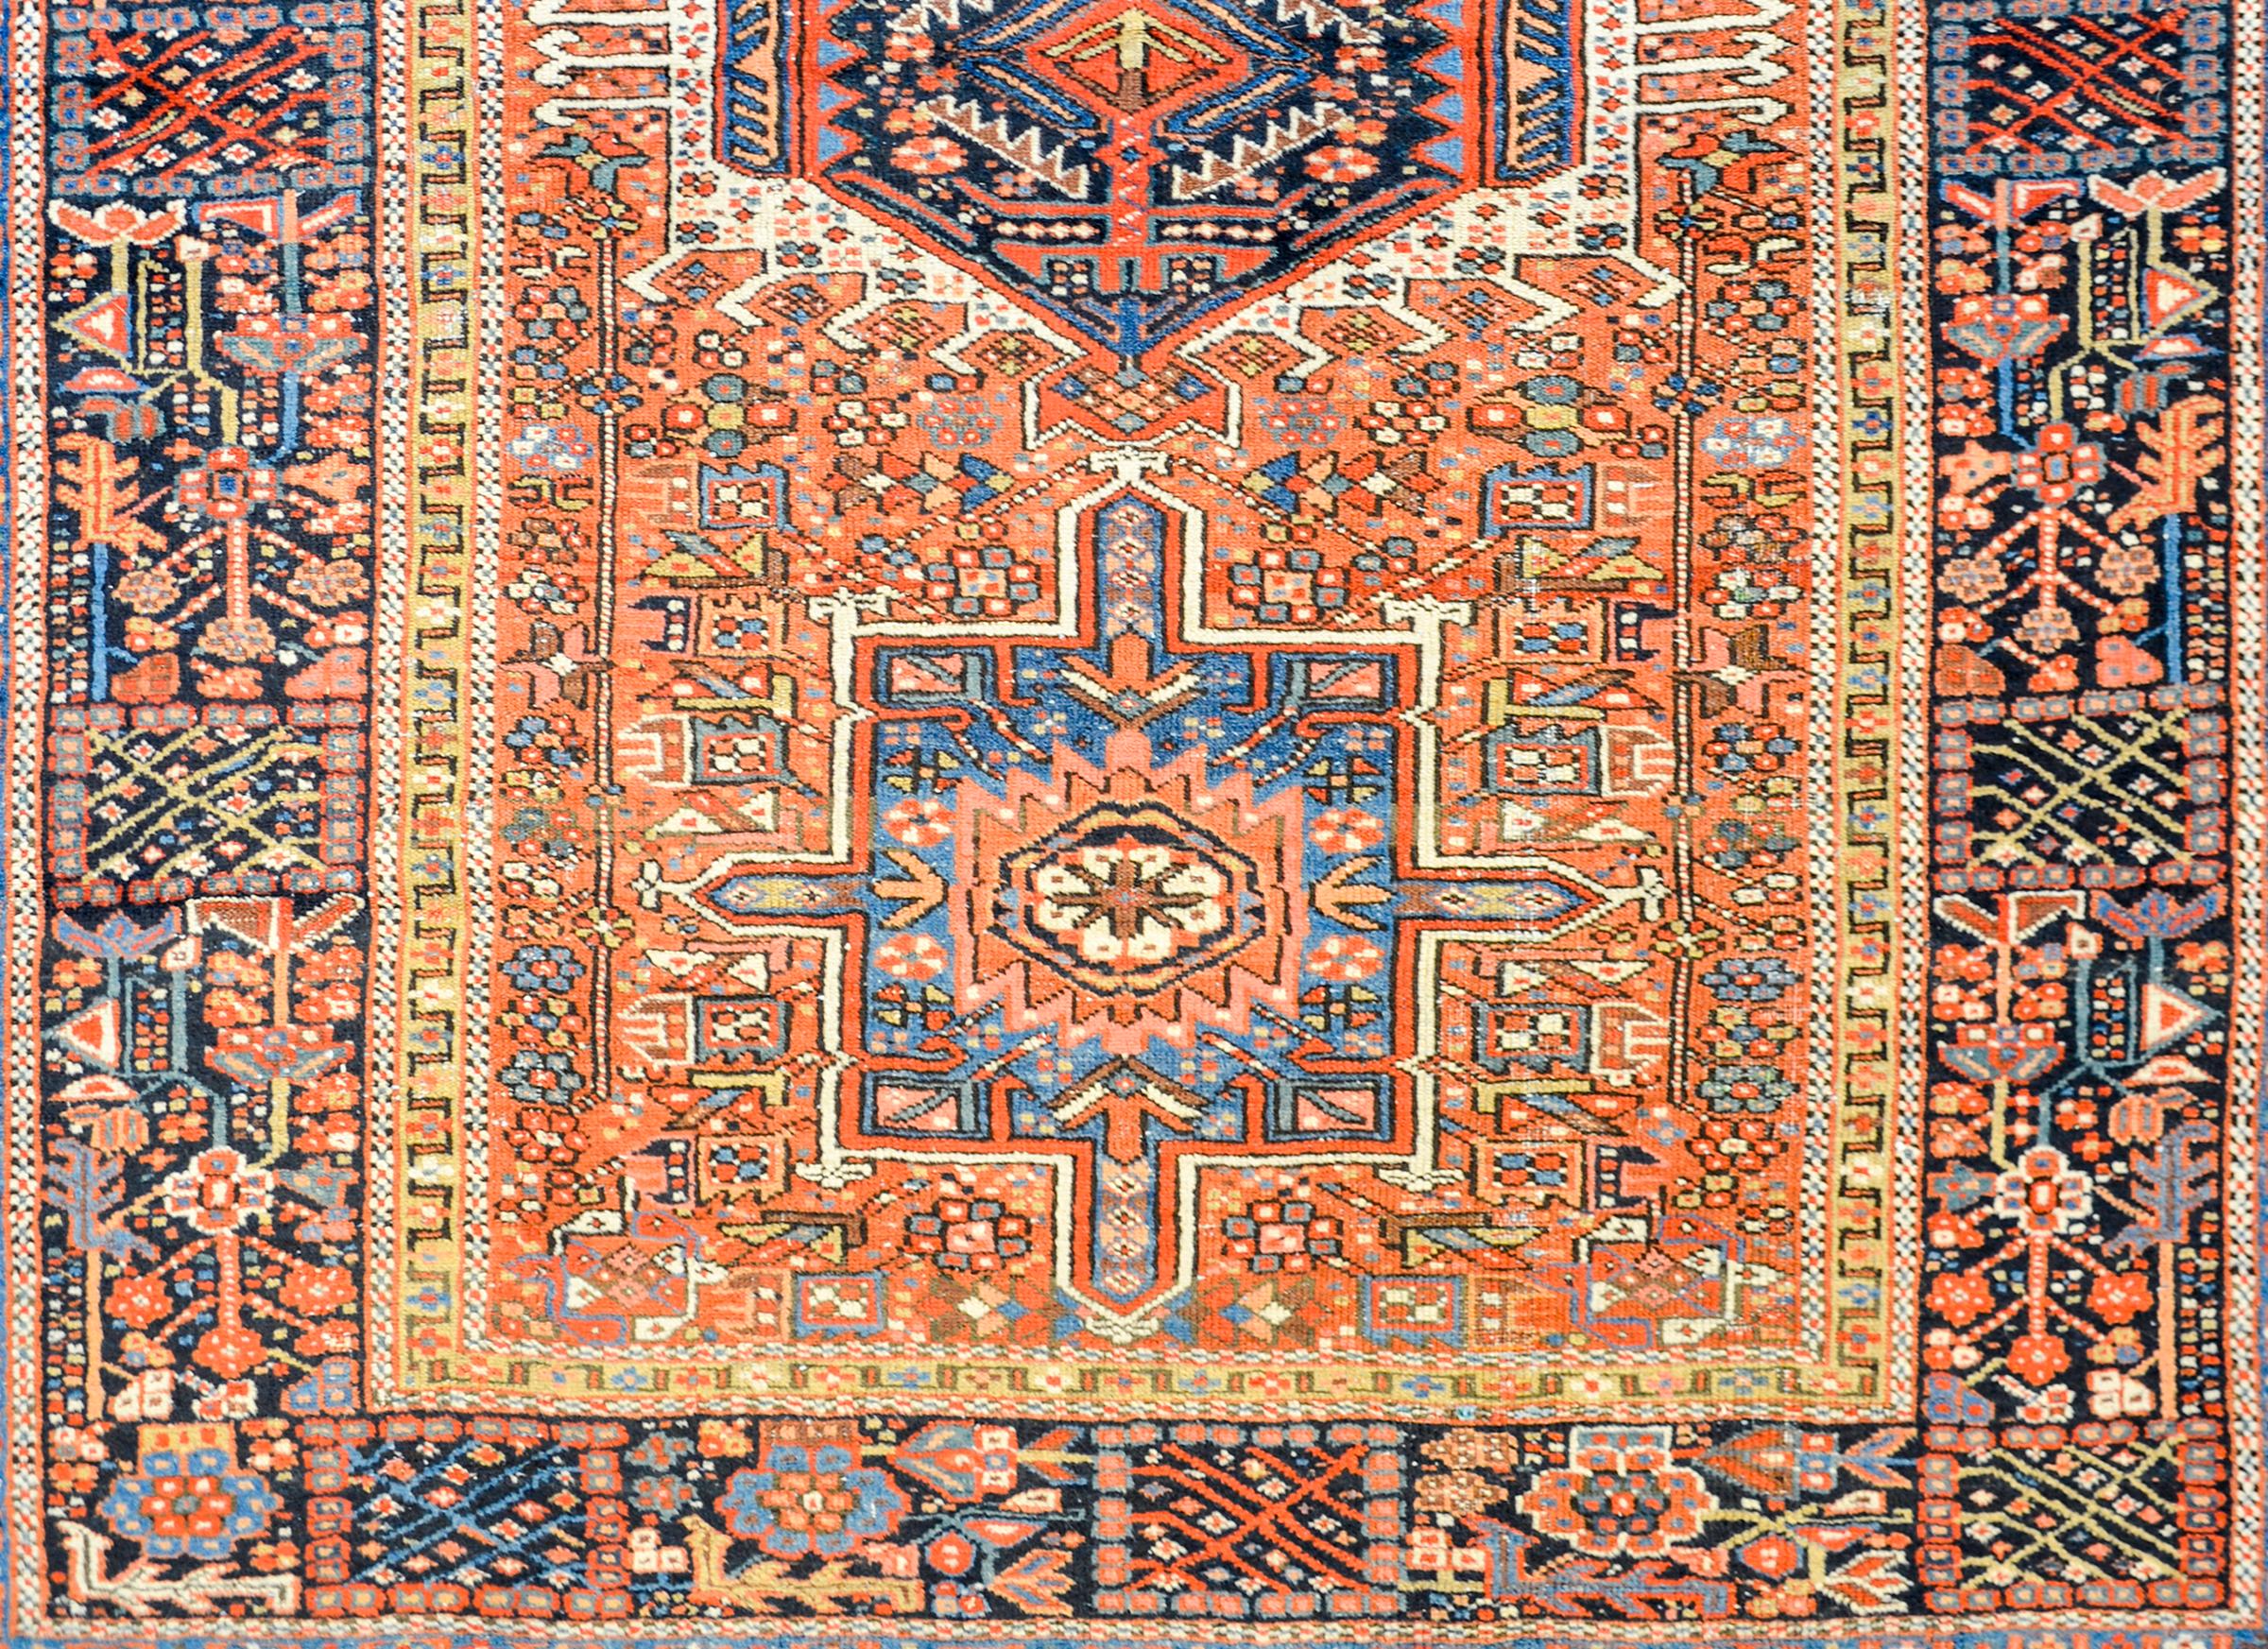 A fantastic early 20th century Persian Heriz rug with a traditional pattern of three large geometric medallions on an elaborate field of stylized flowers, leaves, and twisting vines, all woven in crimson, light and dark indigo, white, gold, black